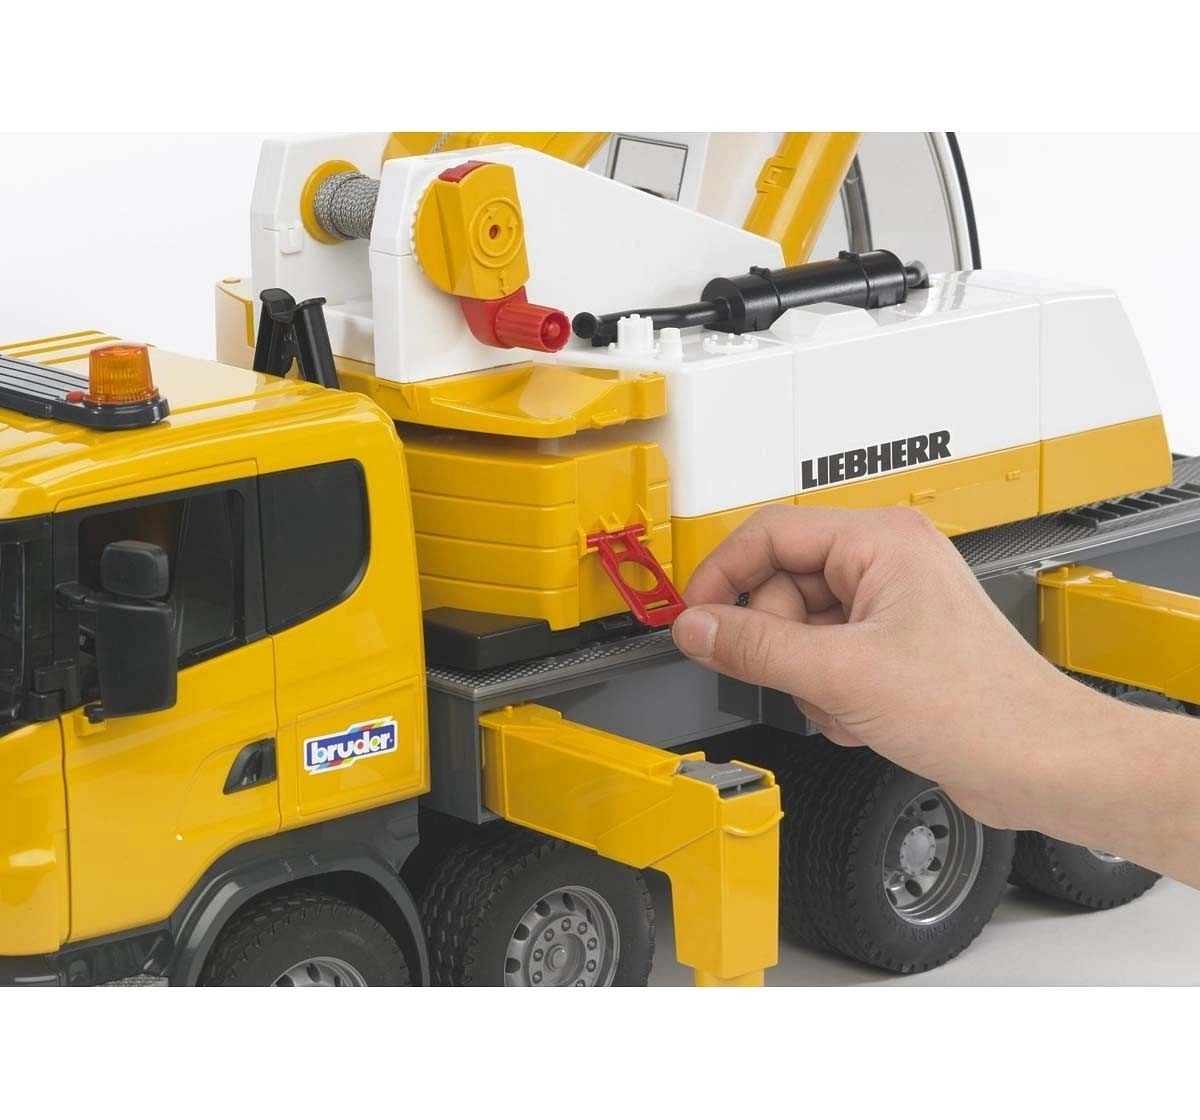 Bruder 1:16 Scania R-Series Yellow Liebherr Crane Truck with Light and Sound Vehicles for Kids age 4Y+